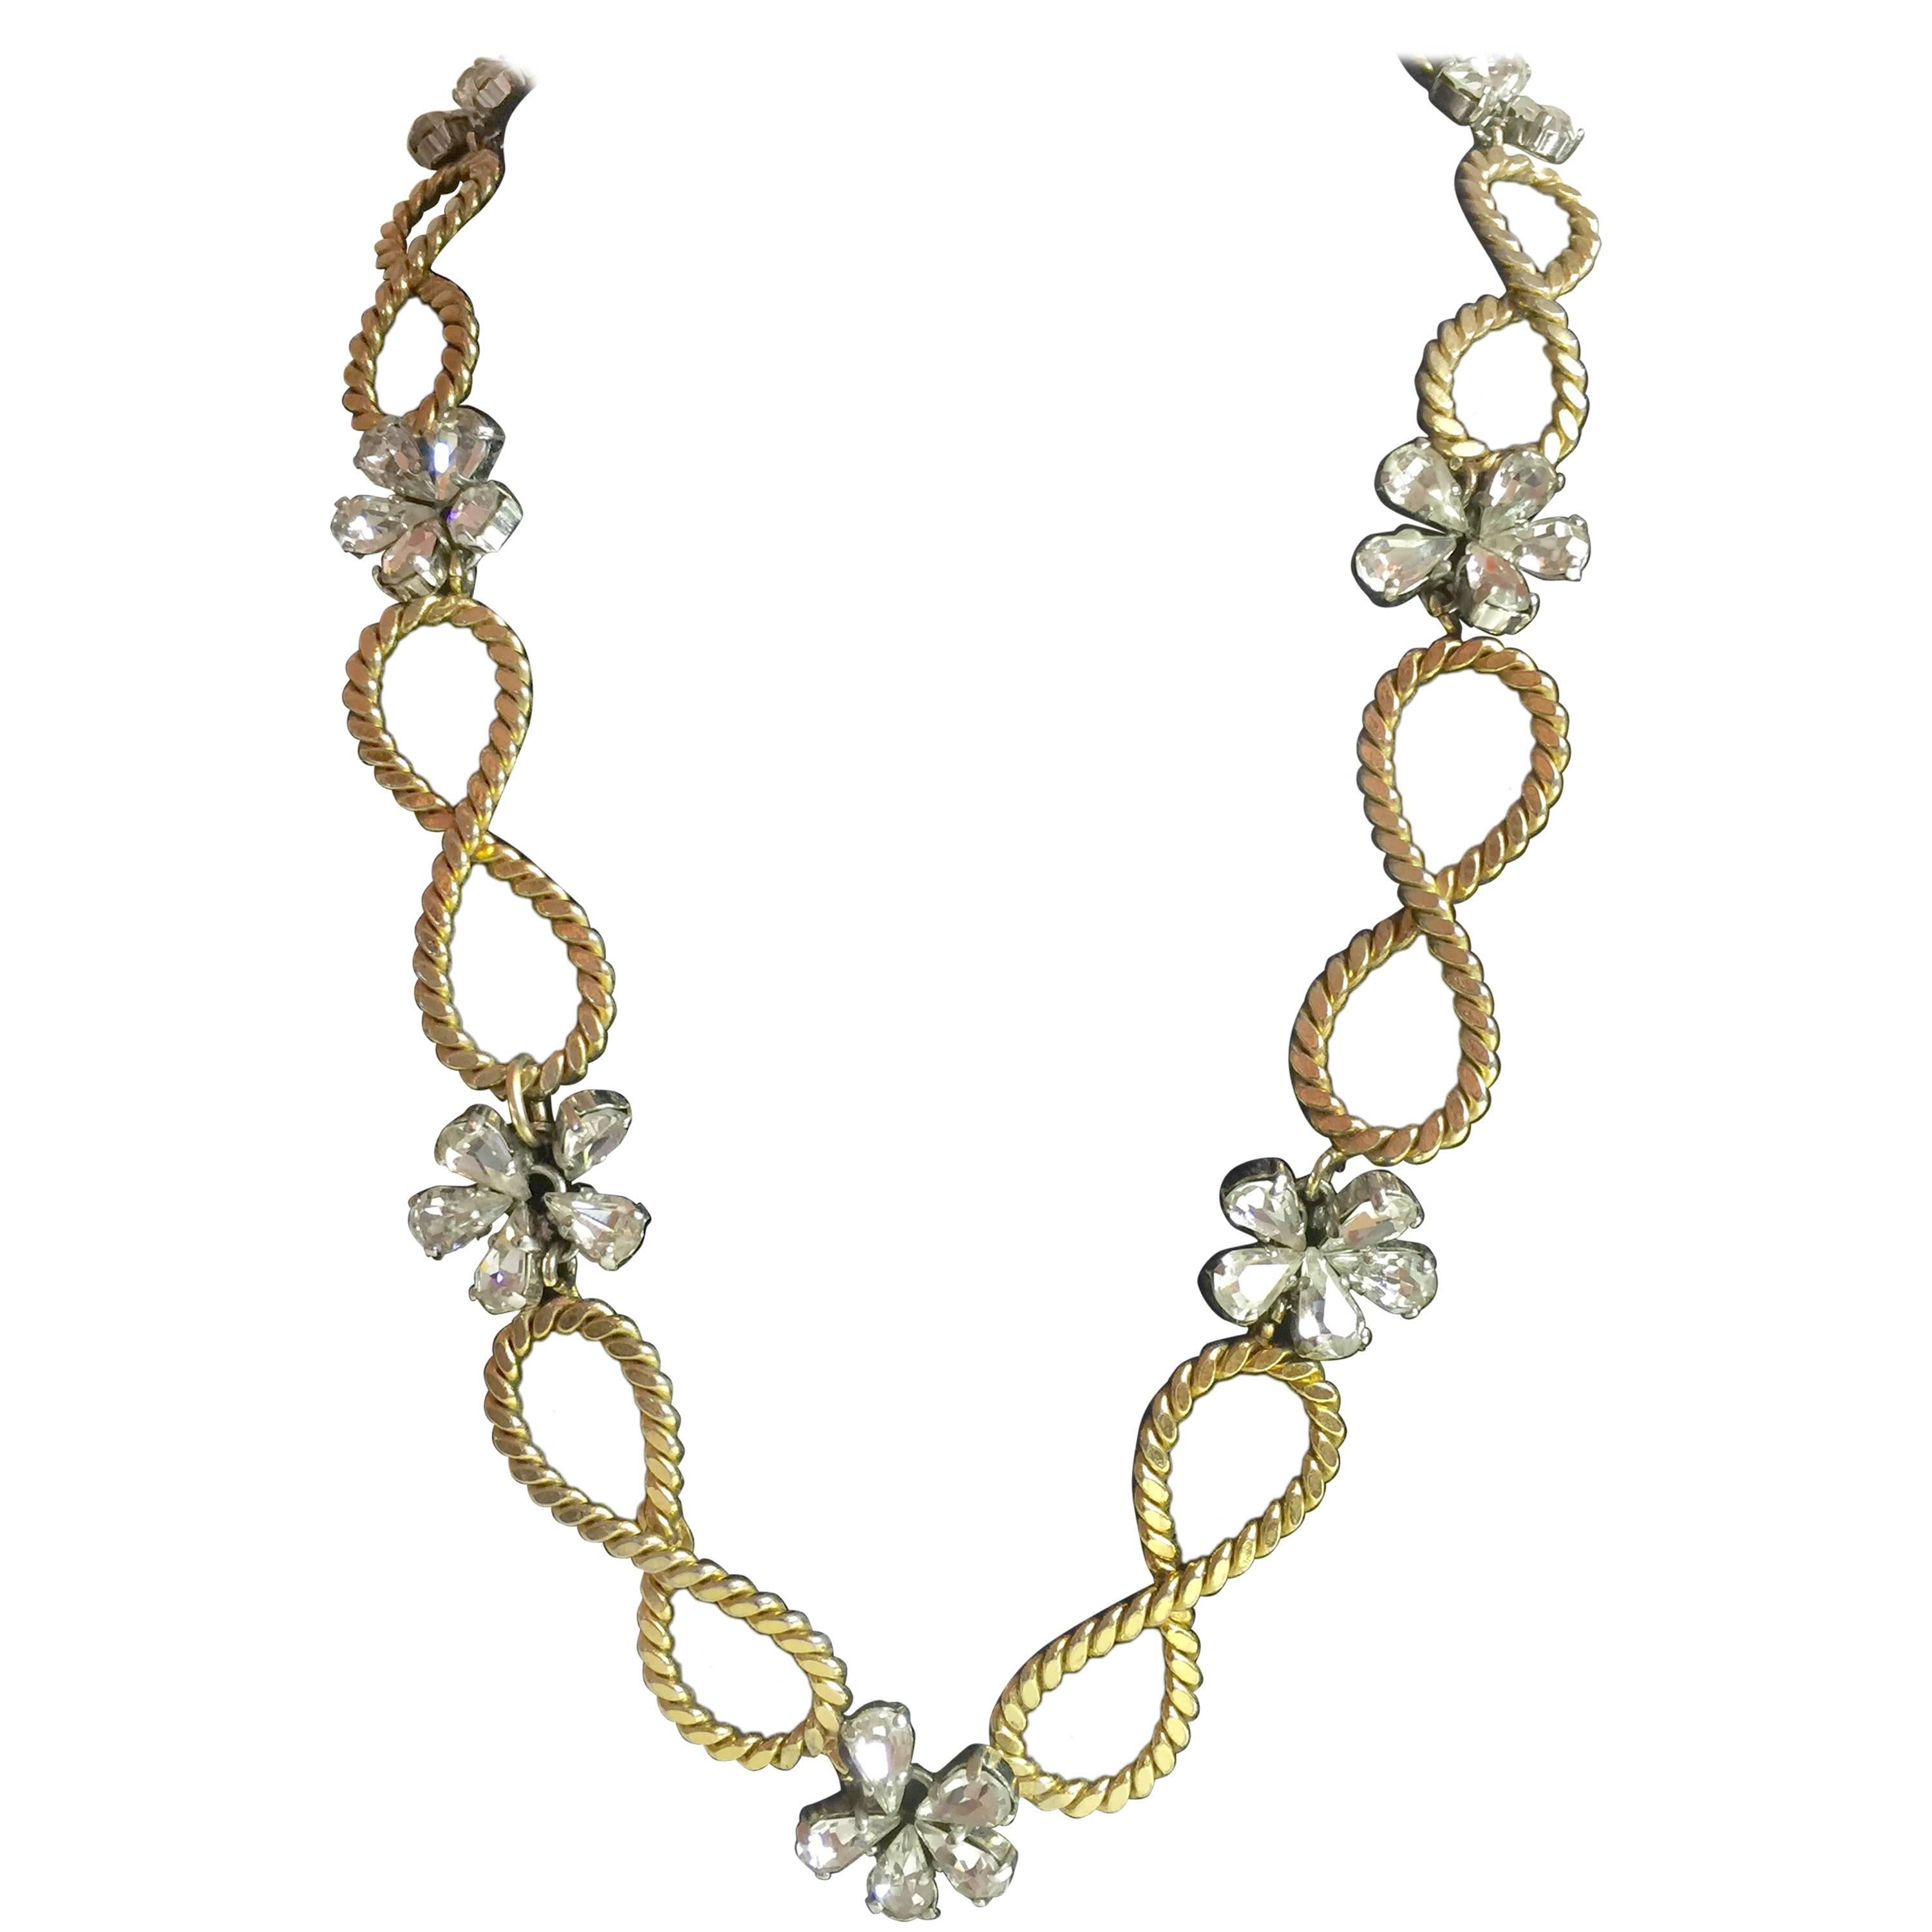 1950's CHRISTIAN DIOR Braided Looped and Floral Rhinestone Necklace 1958 For Sale